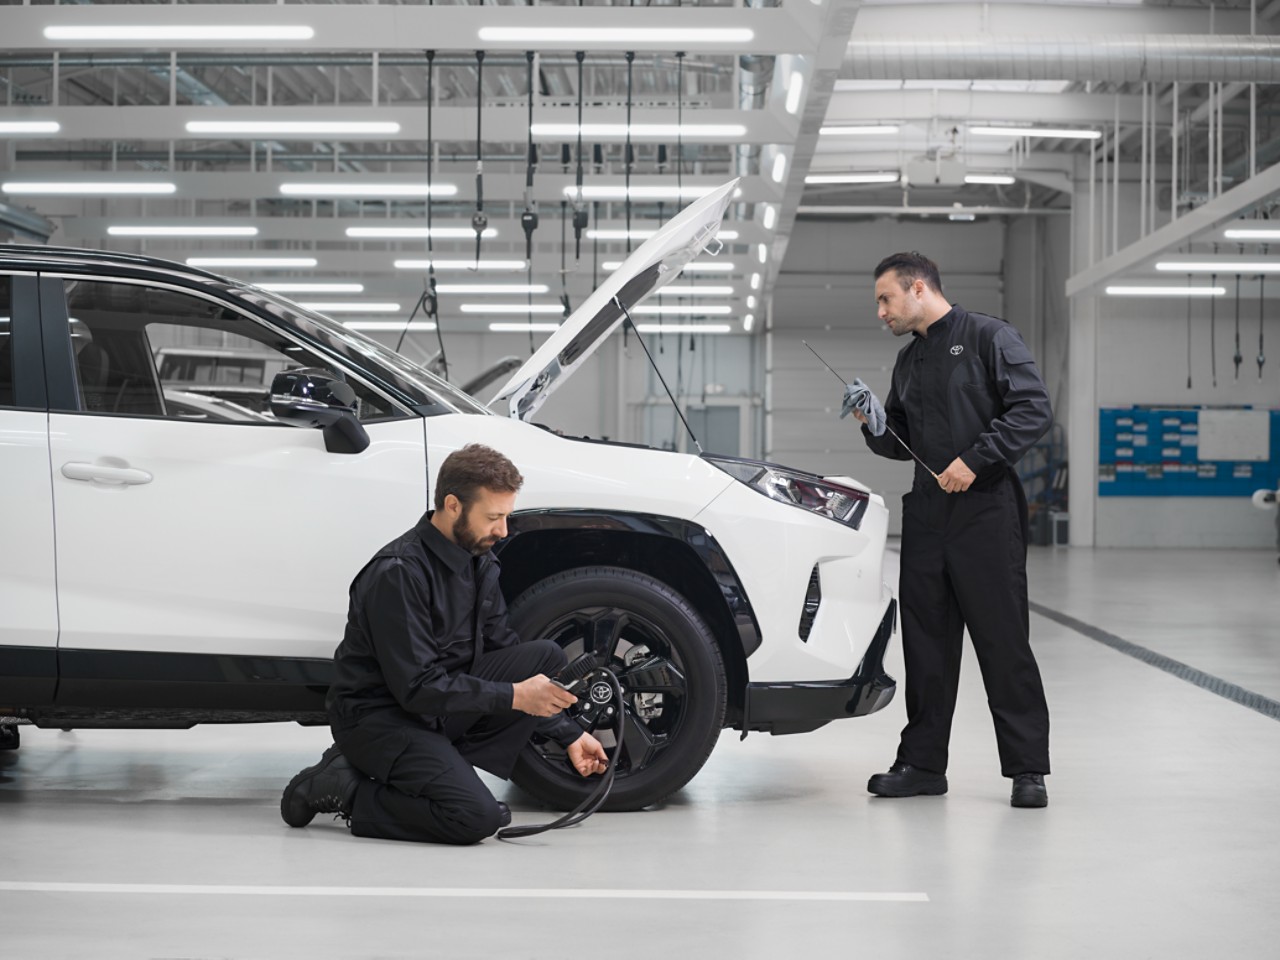 Toyota employees fixing the wheel of a car